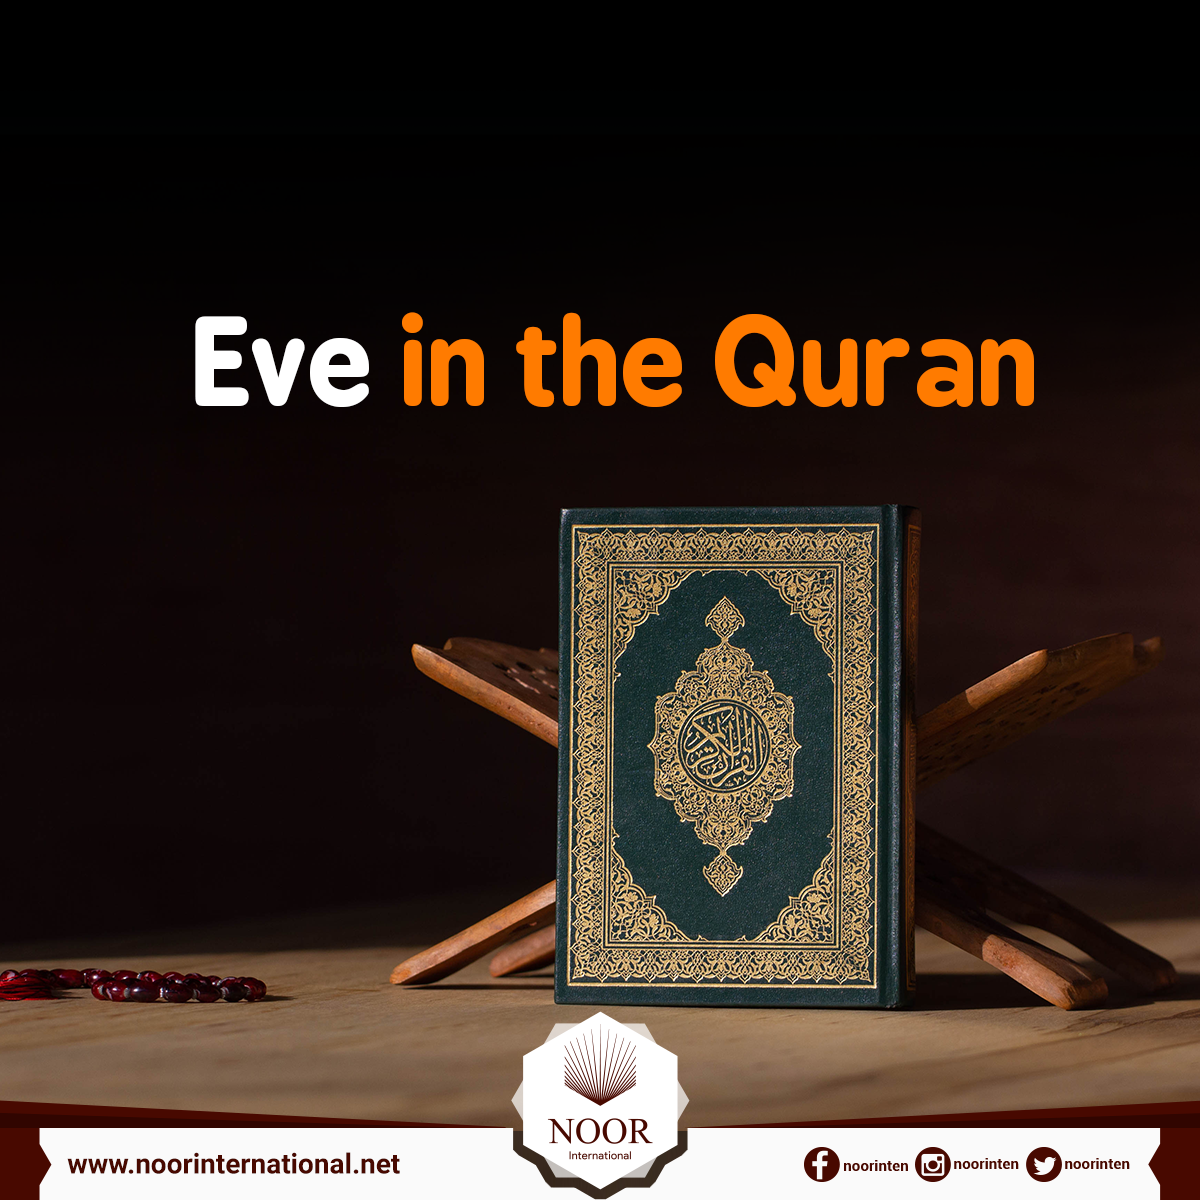 Eve in the Quran